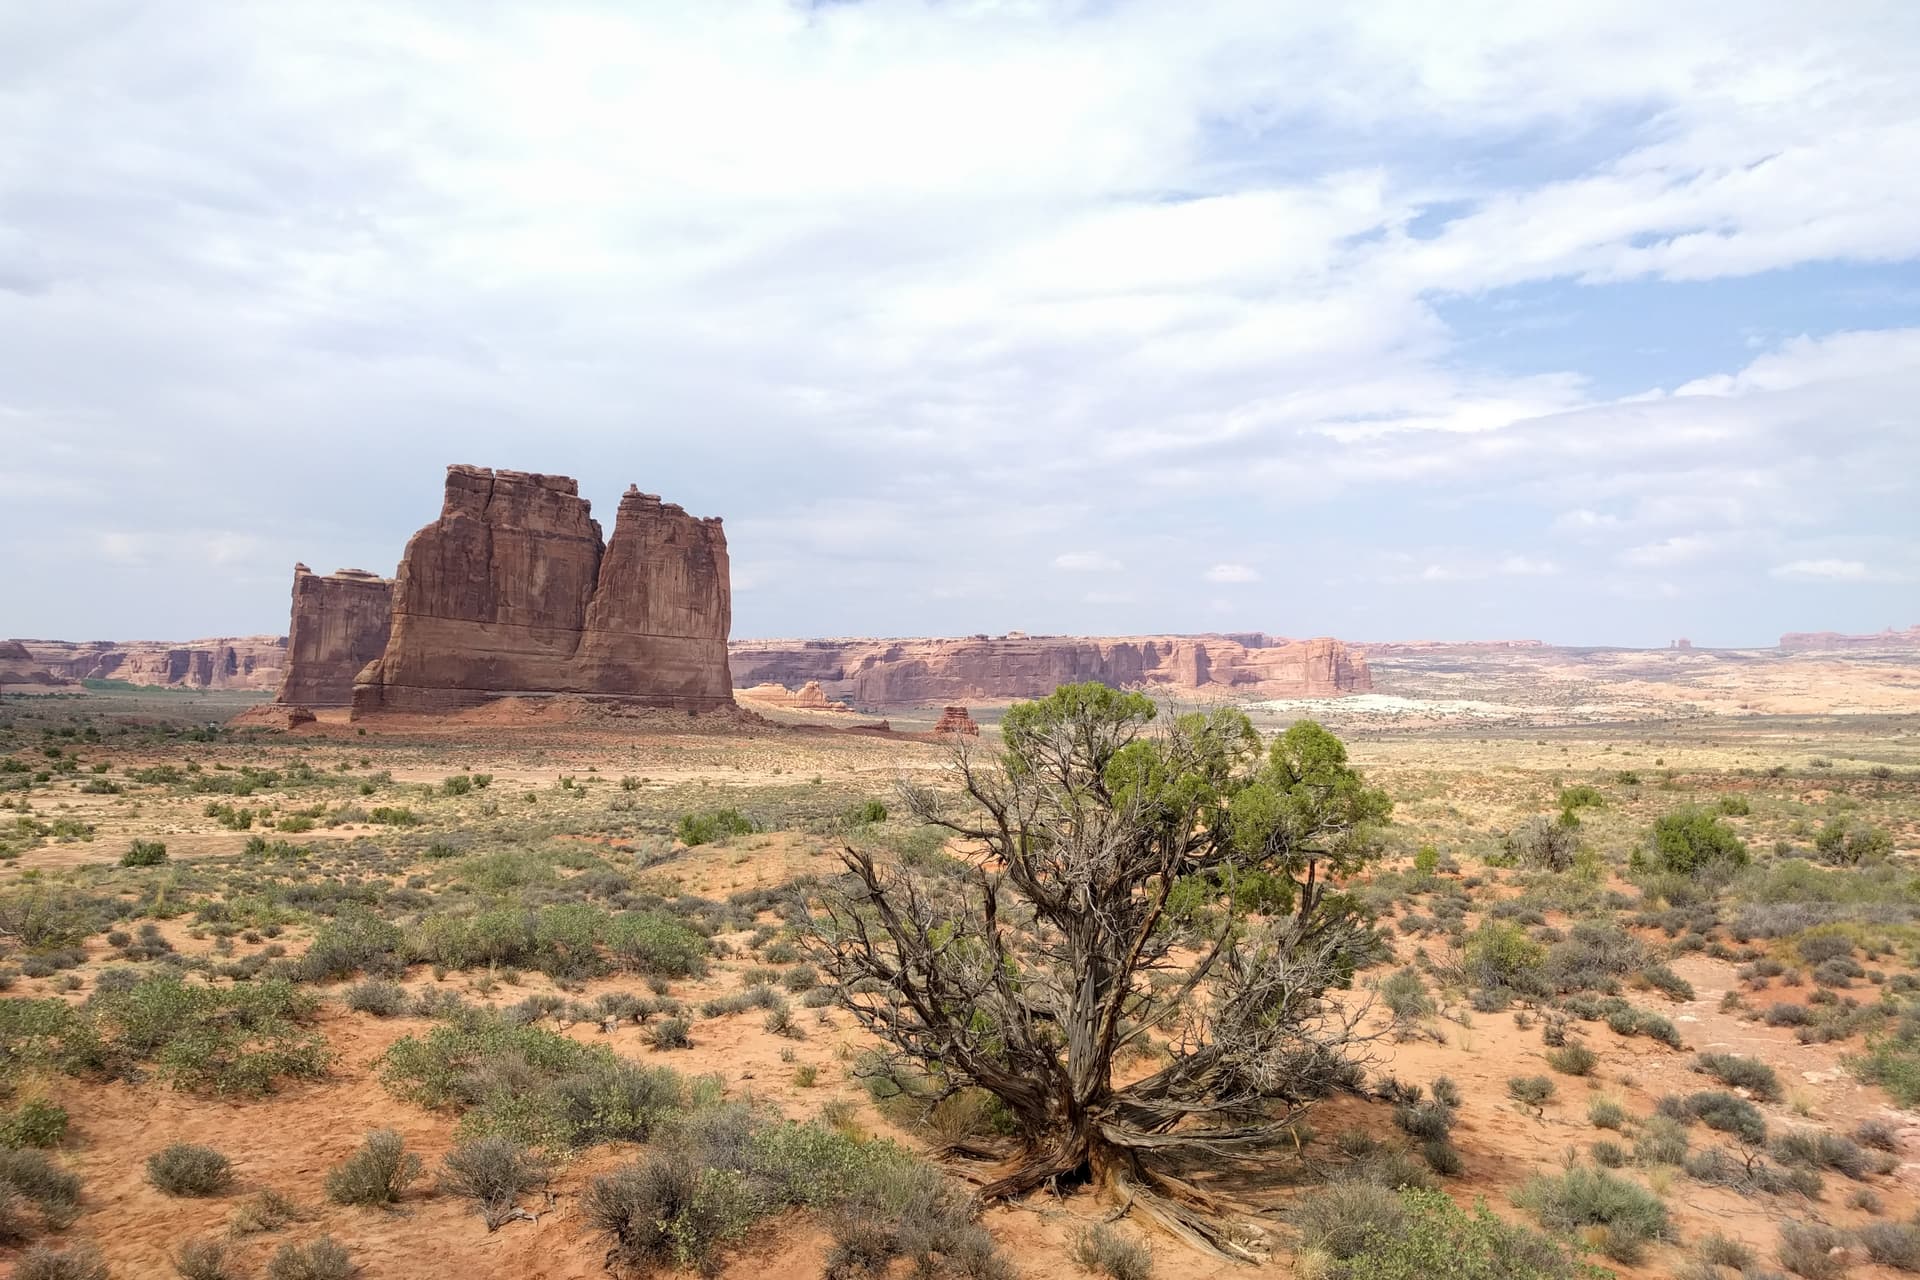 Looking north across Arches National Park. A small bush sits in the foreground, while the background is dominated by tall, thin fins of red sandstone.